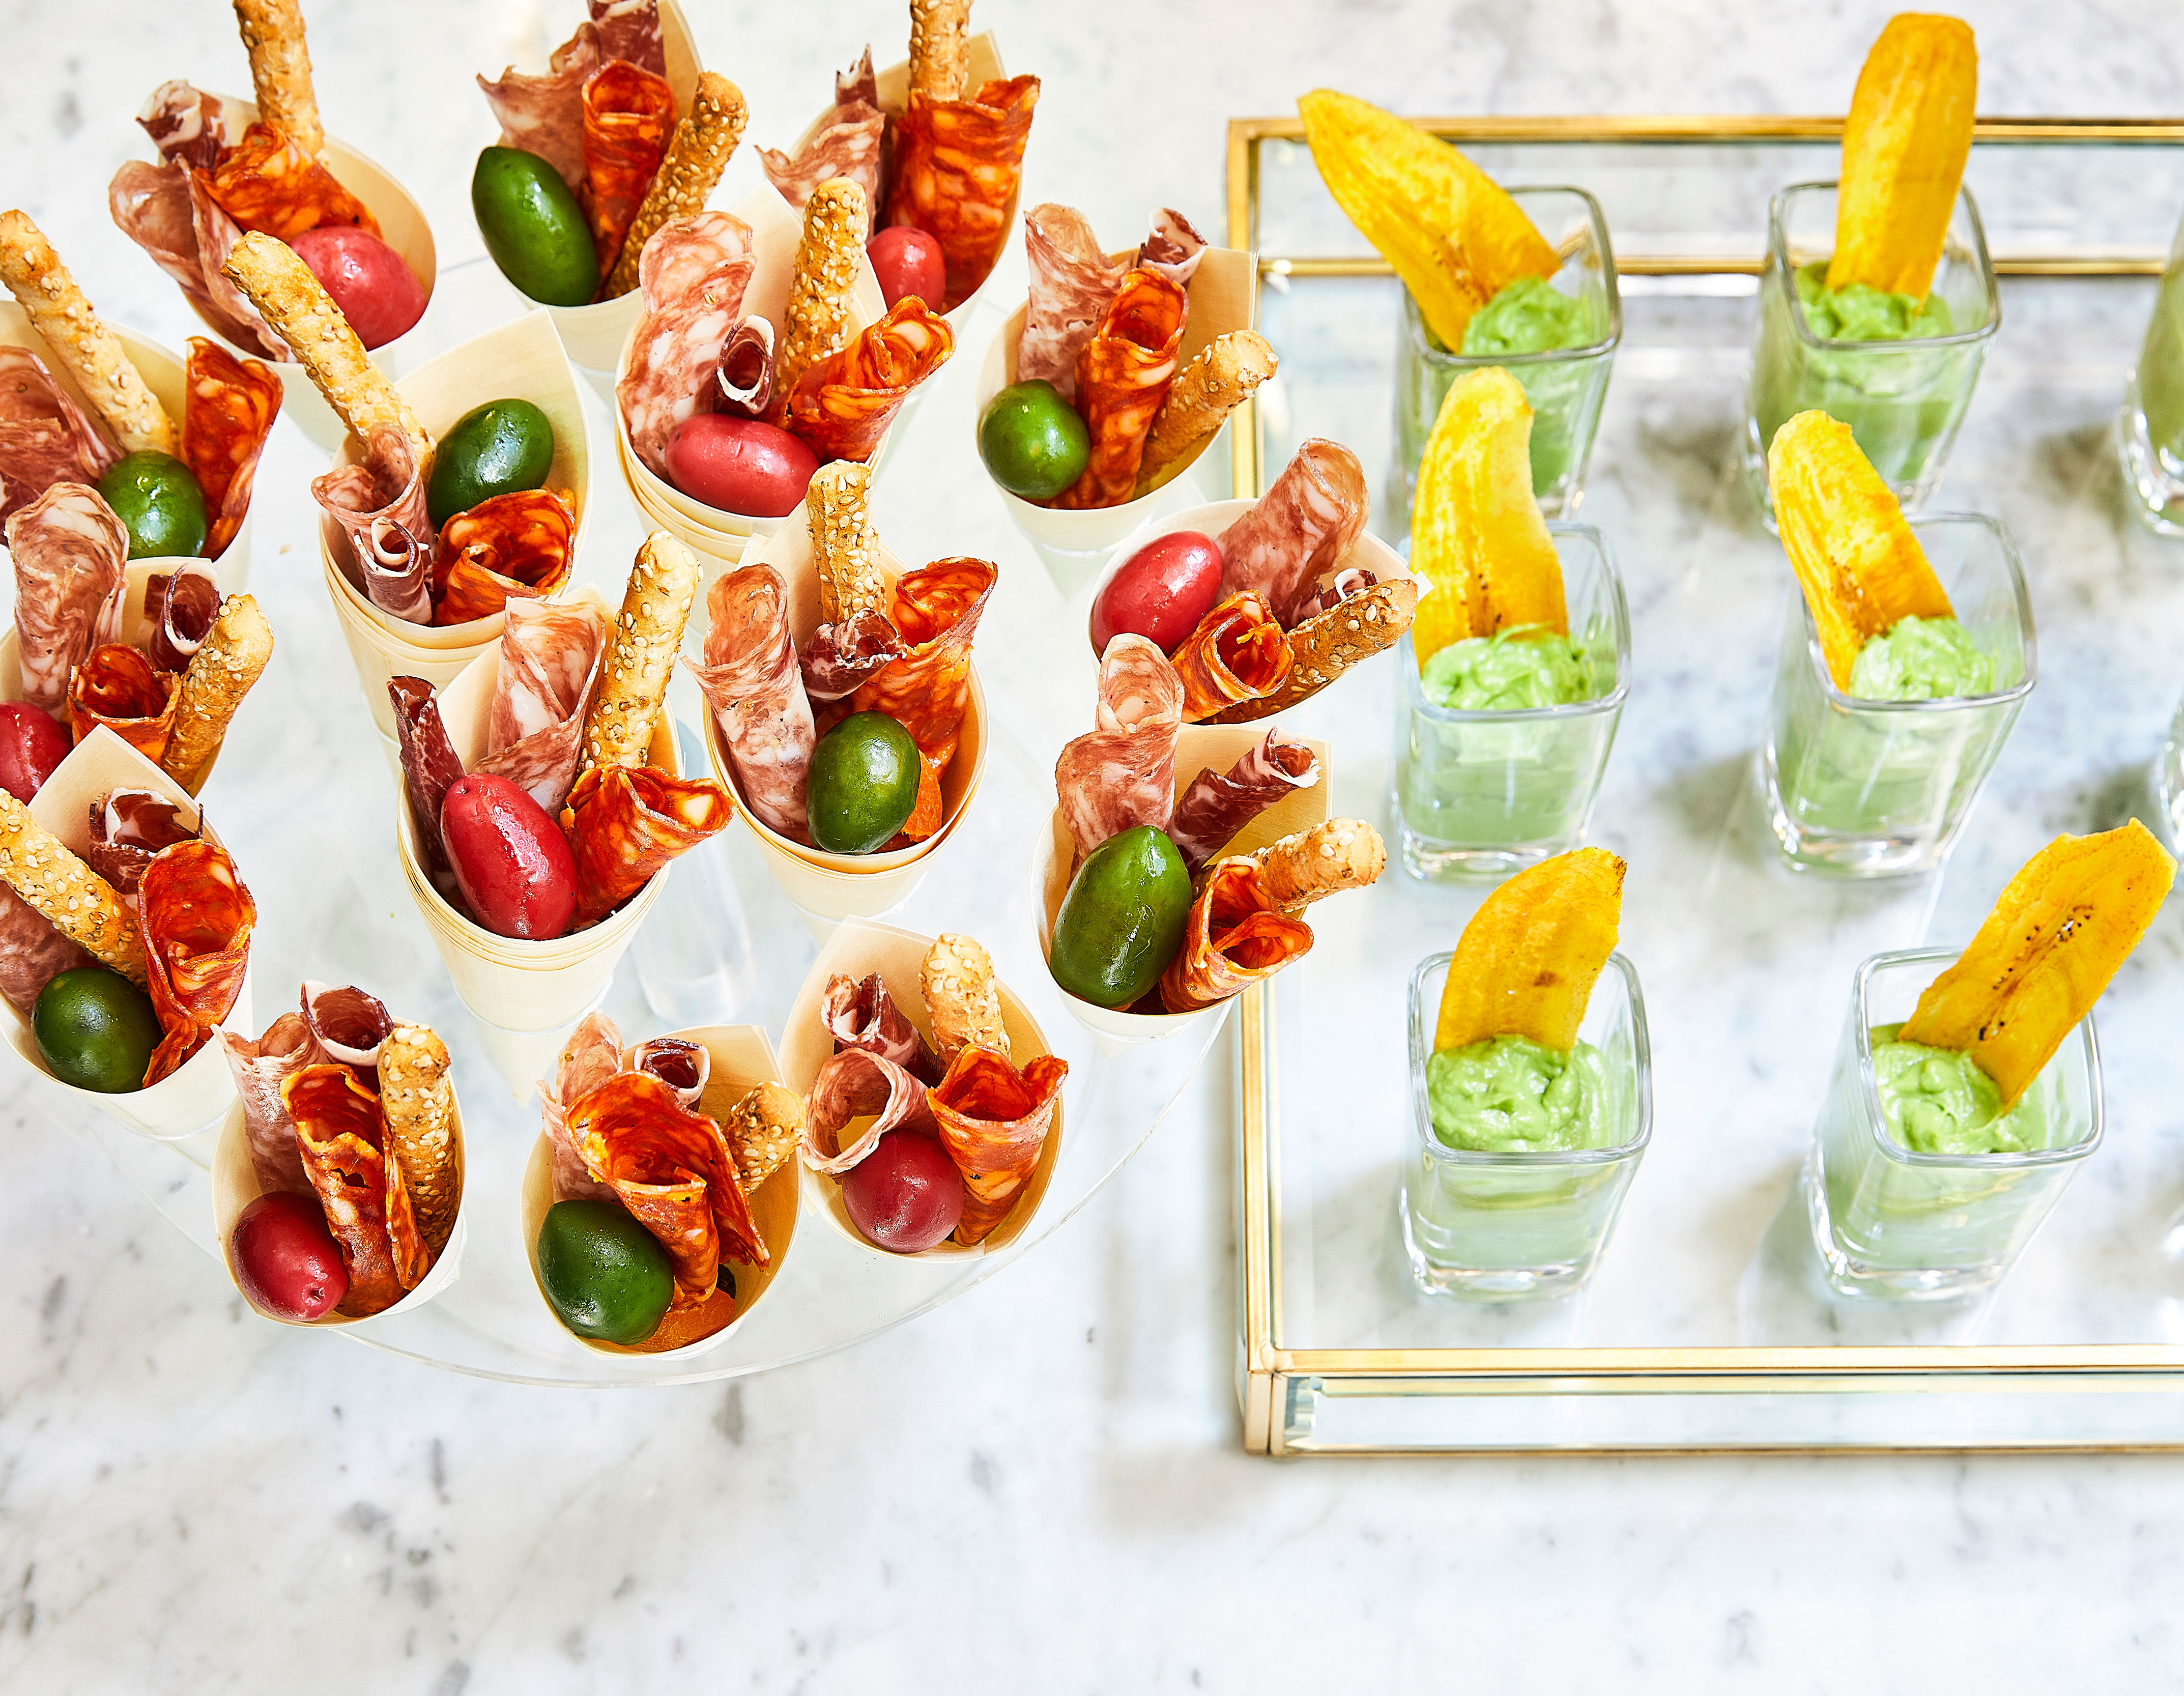 hors d'oeuvres set up on a glass platter